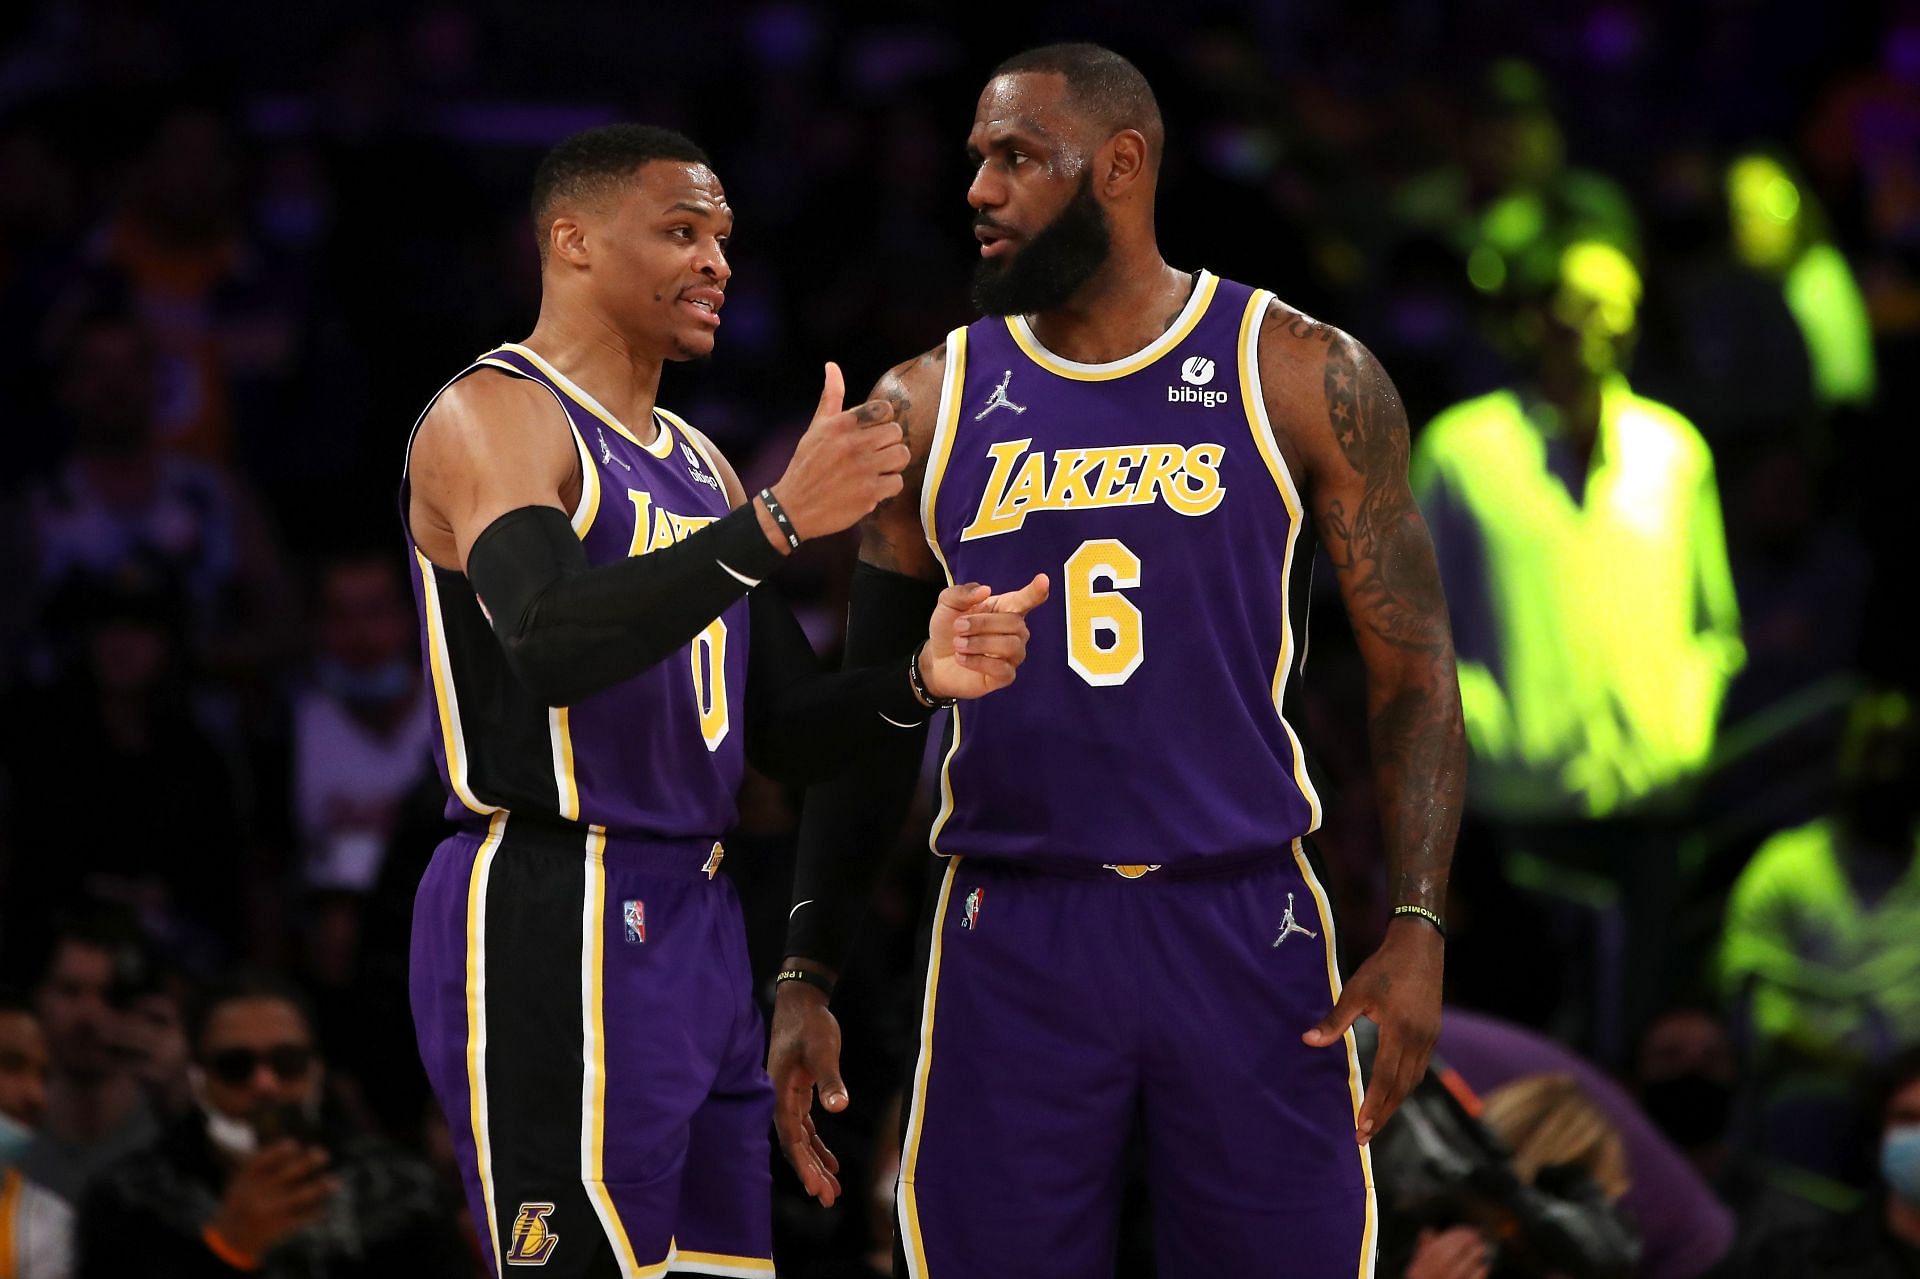 Russell Westbrook and LeBron James of the Los Angeles Lakers